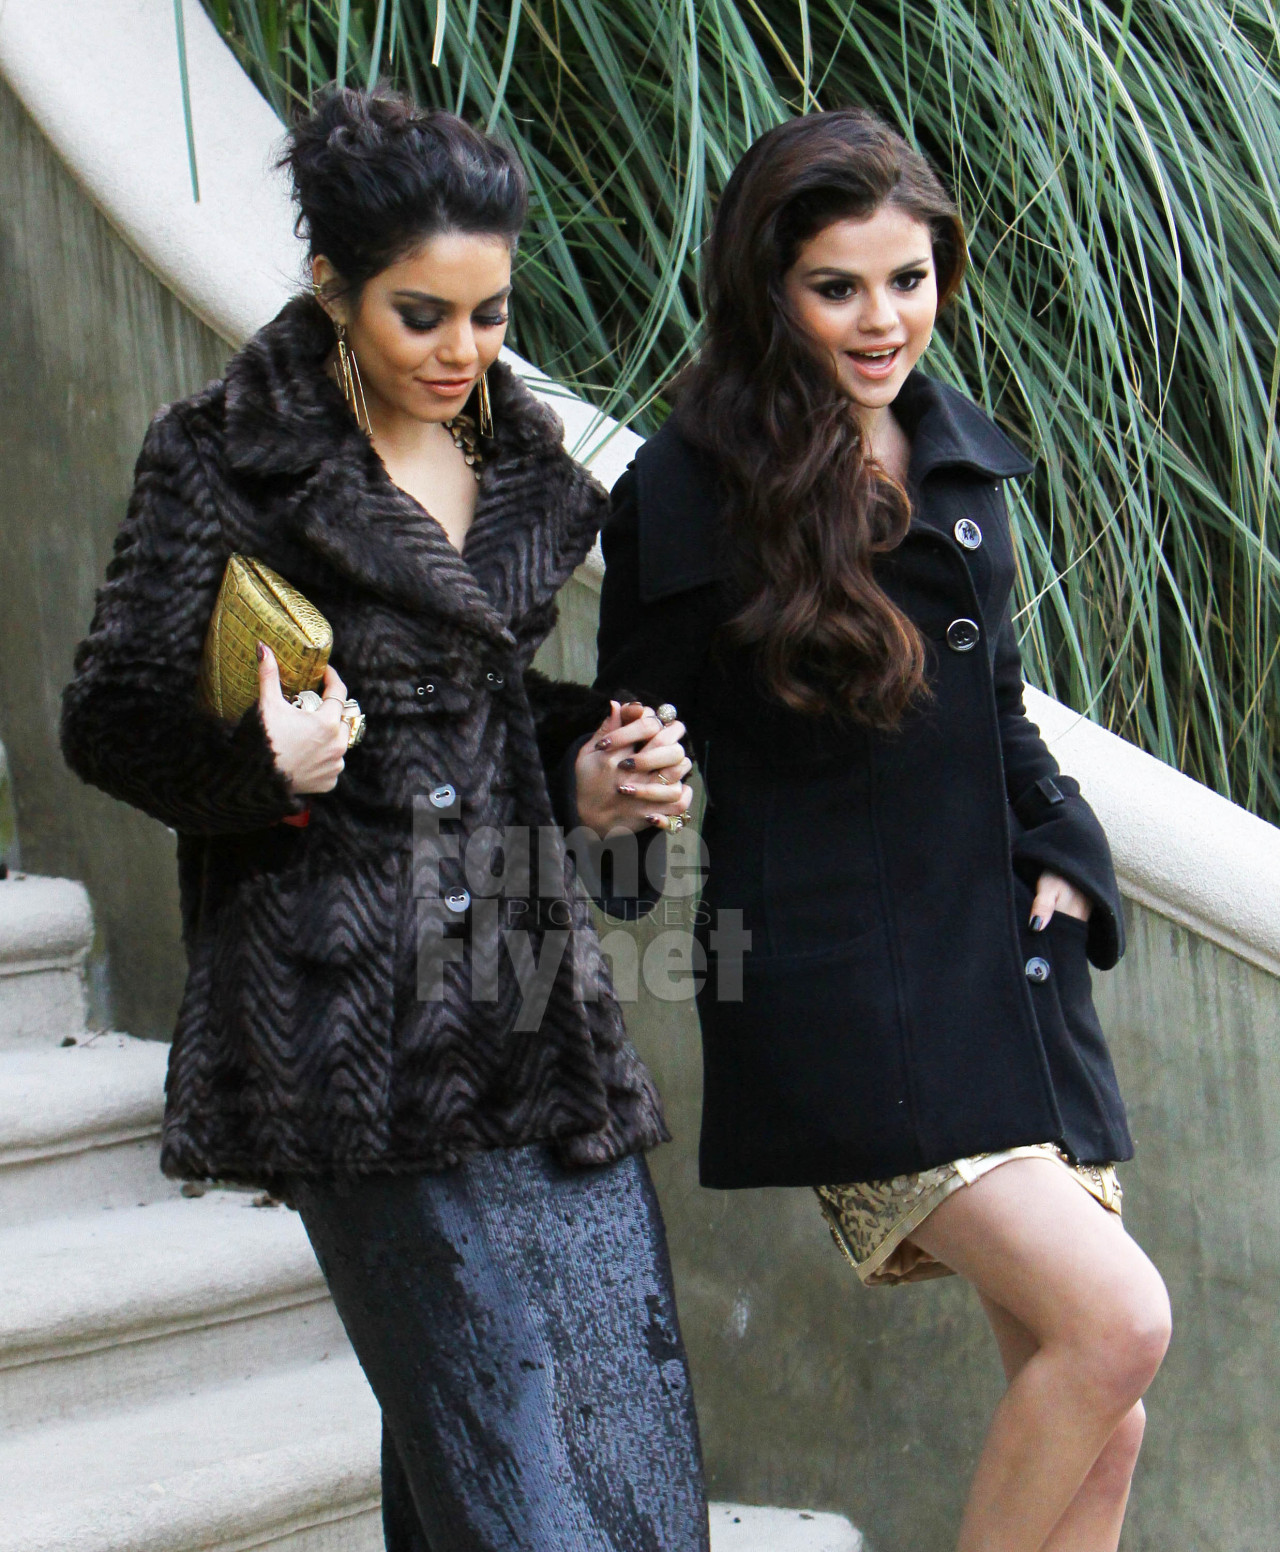 We want to party with @VanessaHudgens & @SelenaGomez! Here they are looking beautiful and heading to the Golden Globes!